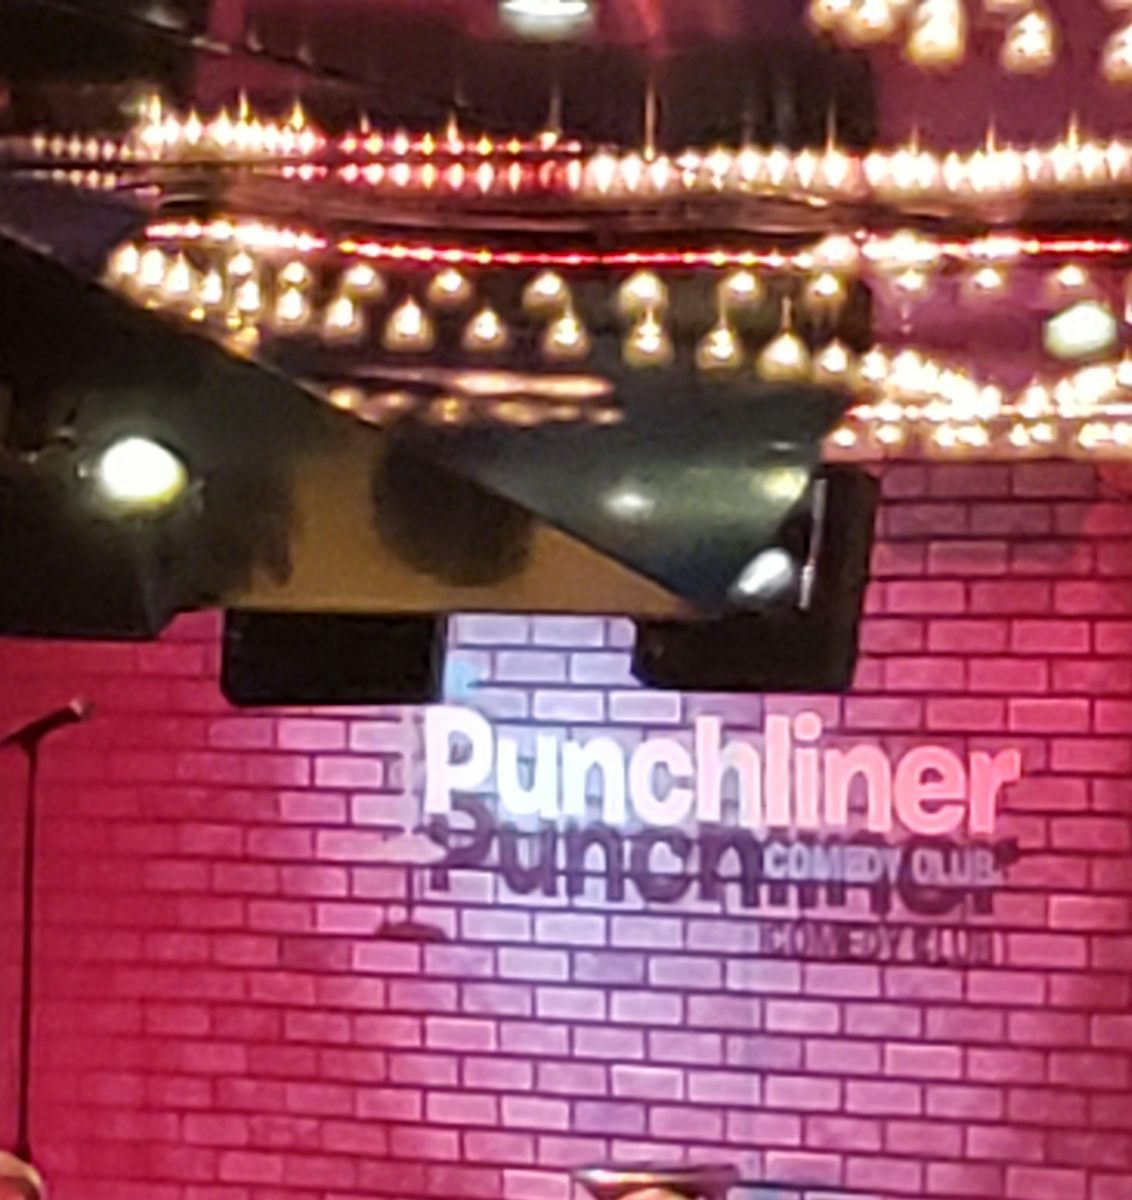 This is the comedy show. This is where I spent most of my time.